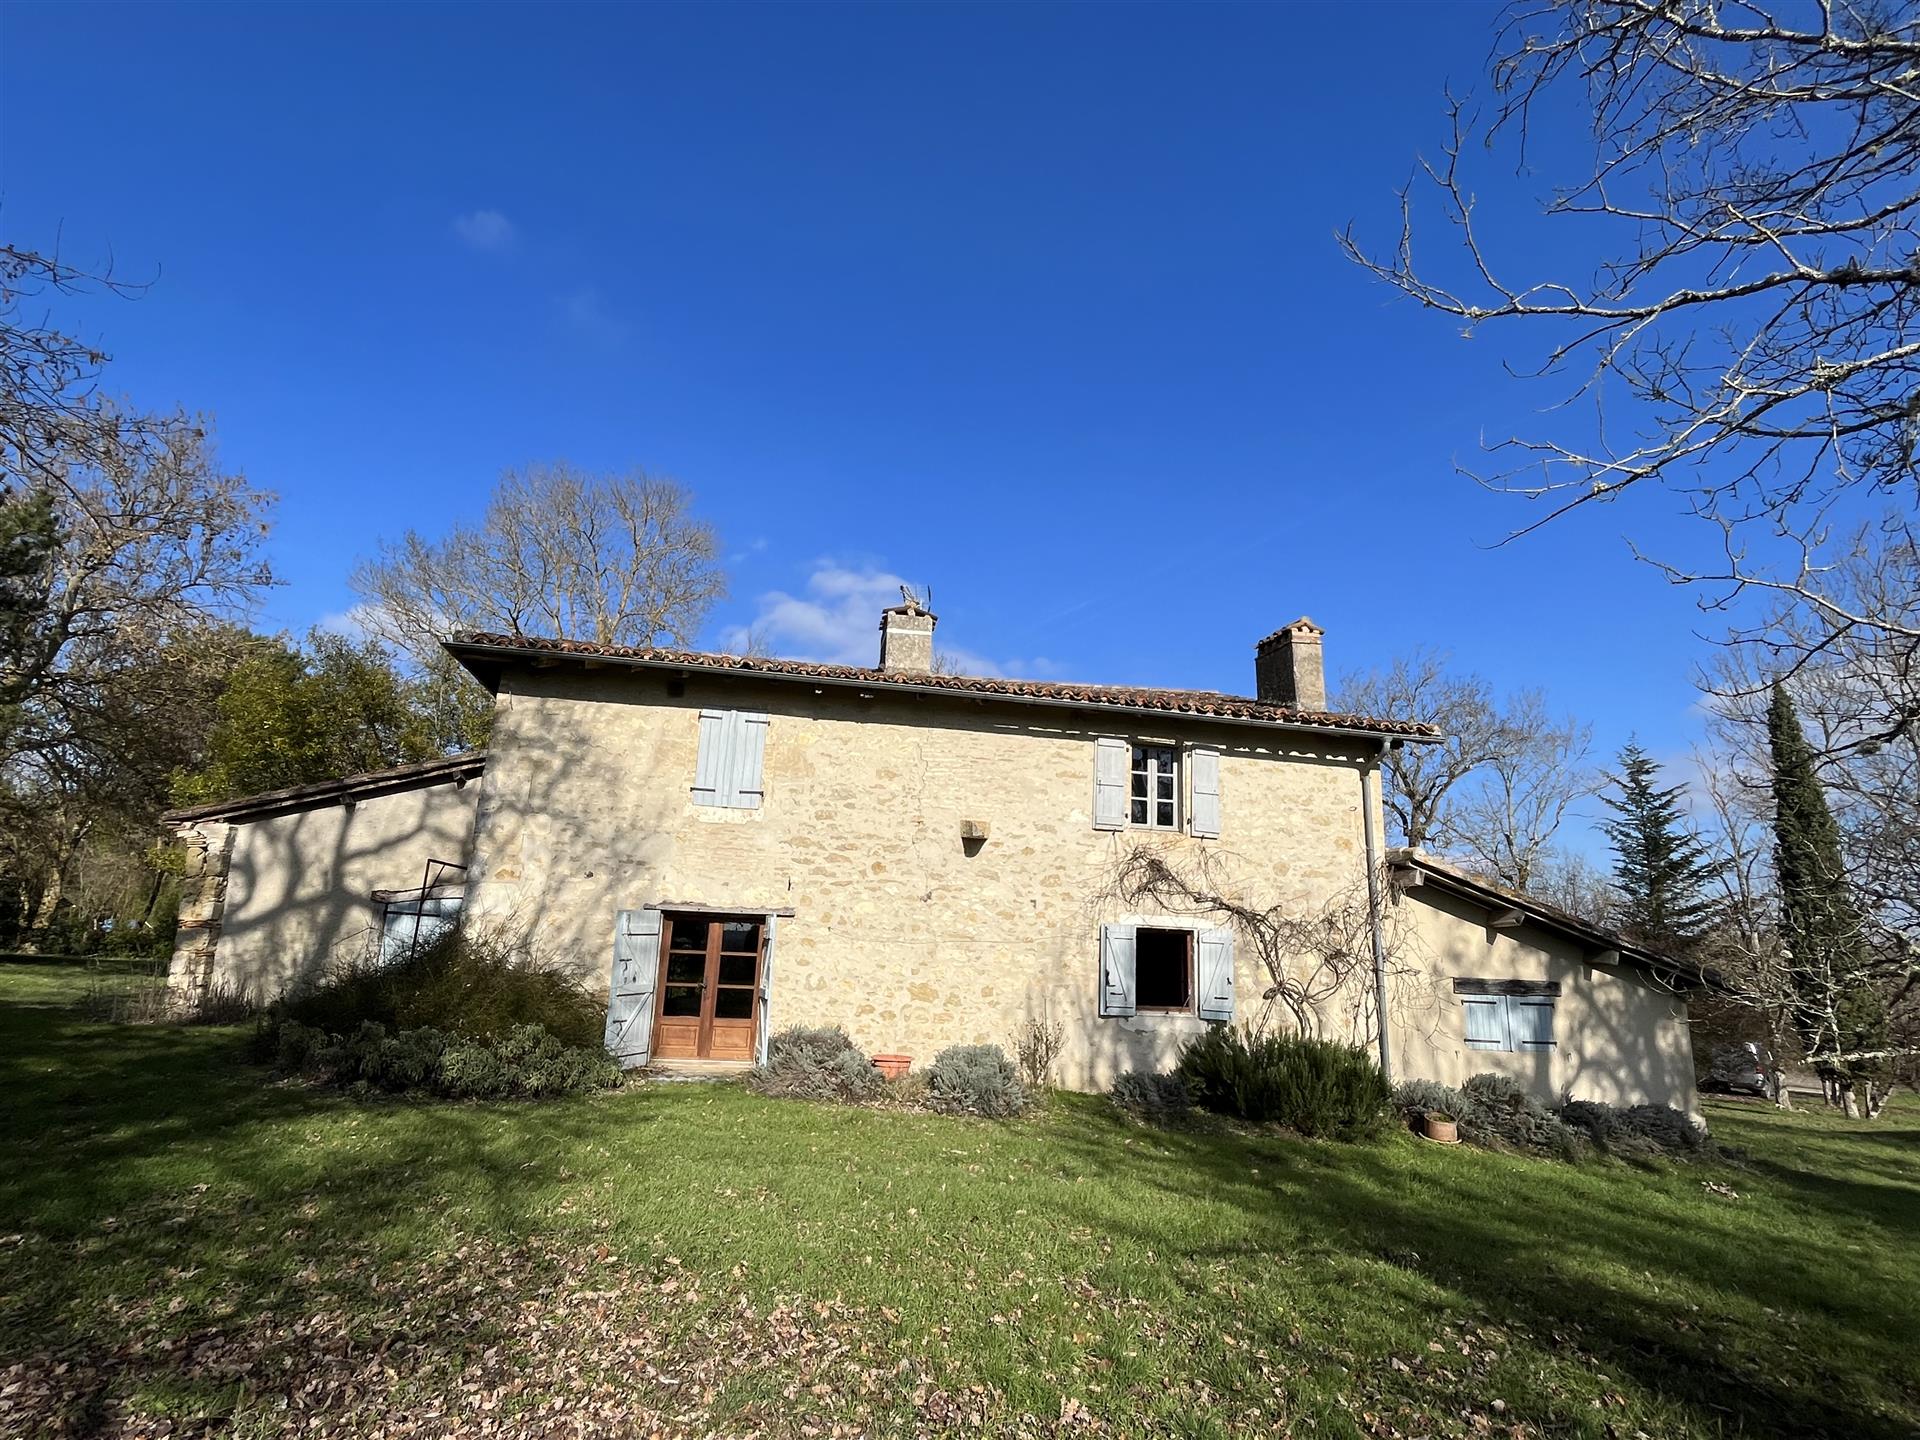 Country house 200m² - 5 bedrooms - Outbuildings - Pyrenees view